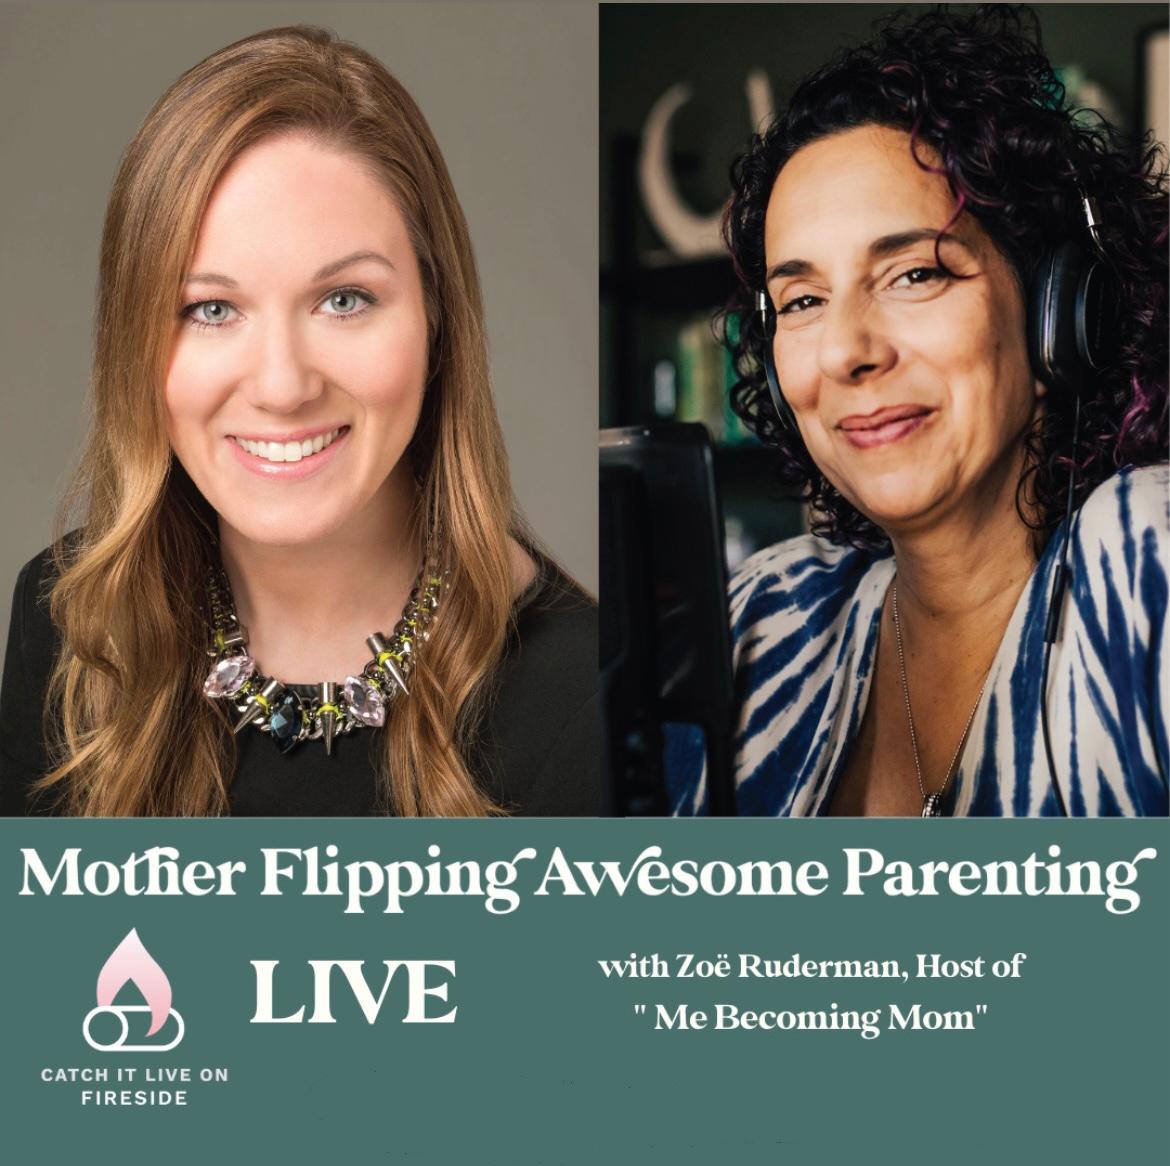 Mother Flipping Awesome Parenting: Me Becoming Mom